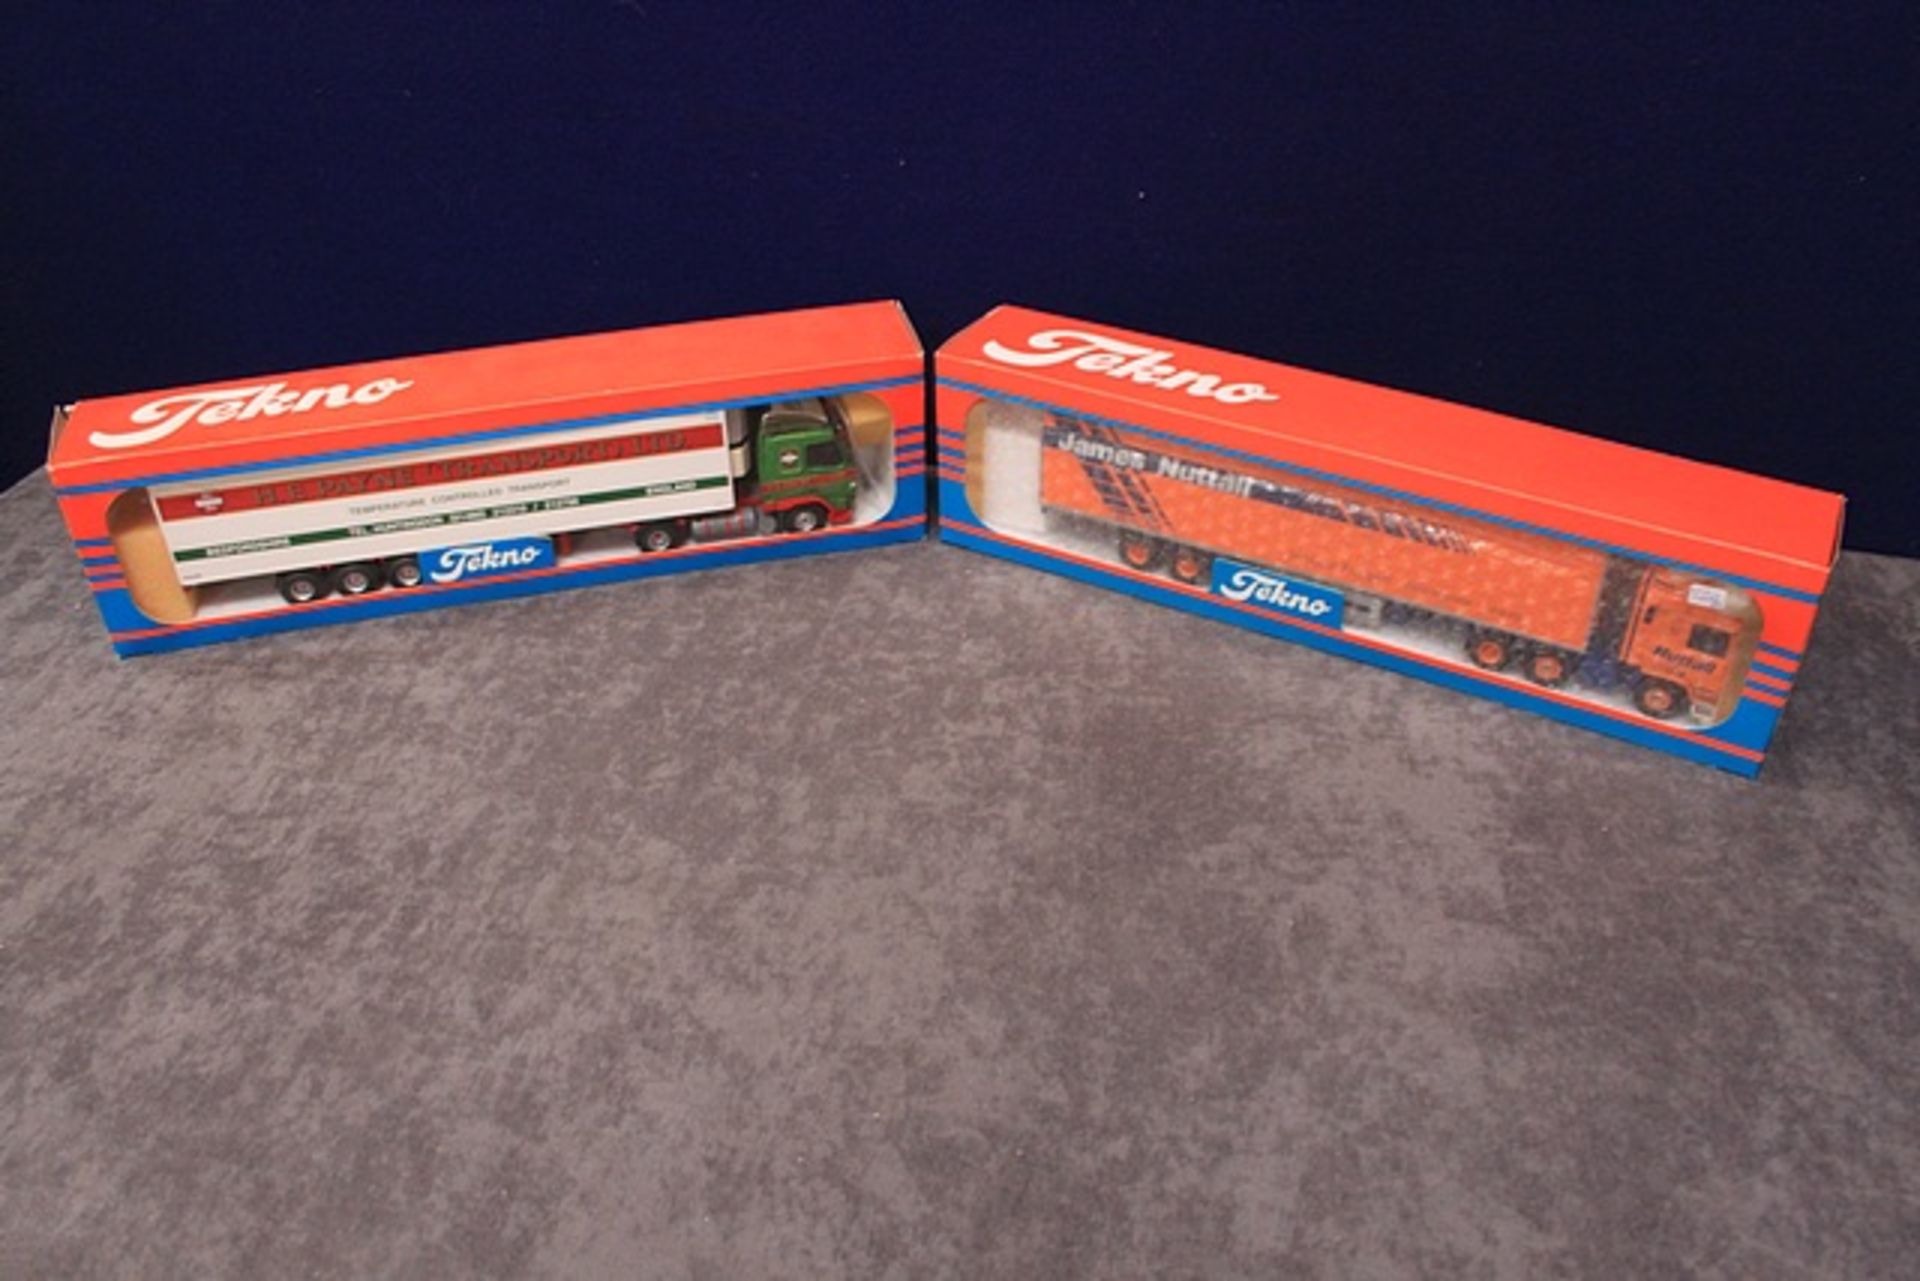 2x Tekno Lorries From The British Collection In Individual Boxes Comprising Of: Nr 60 H.E Payne - Image 3 of 3